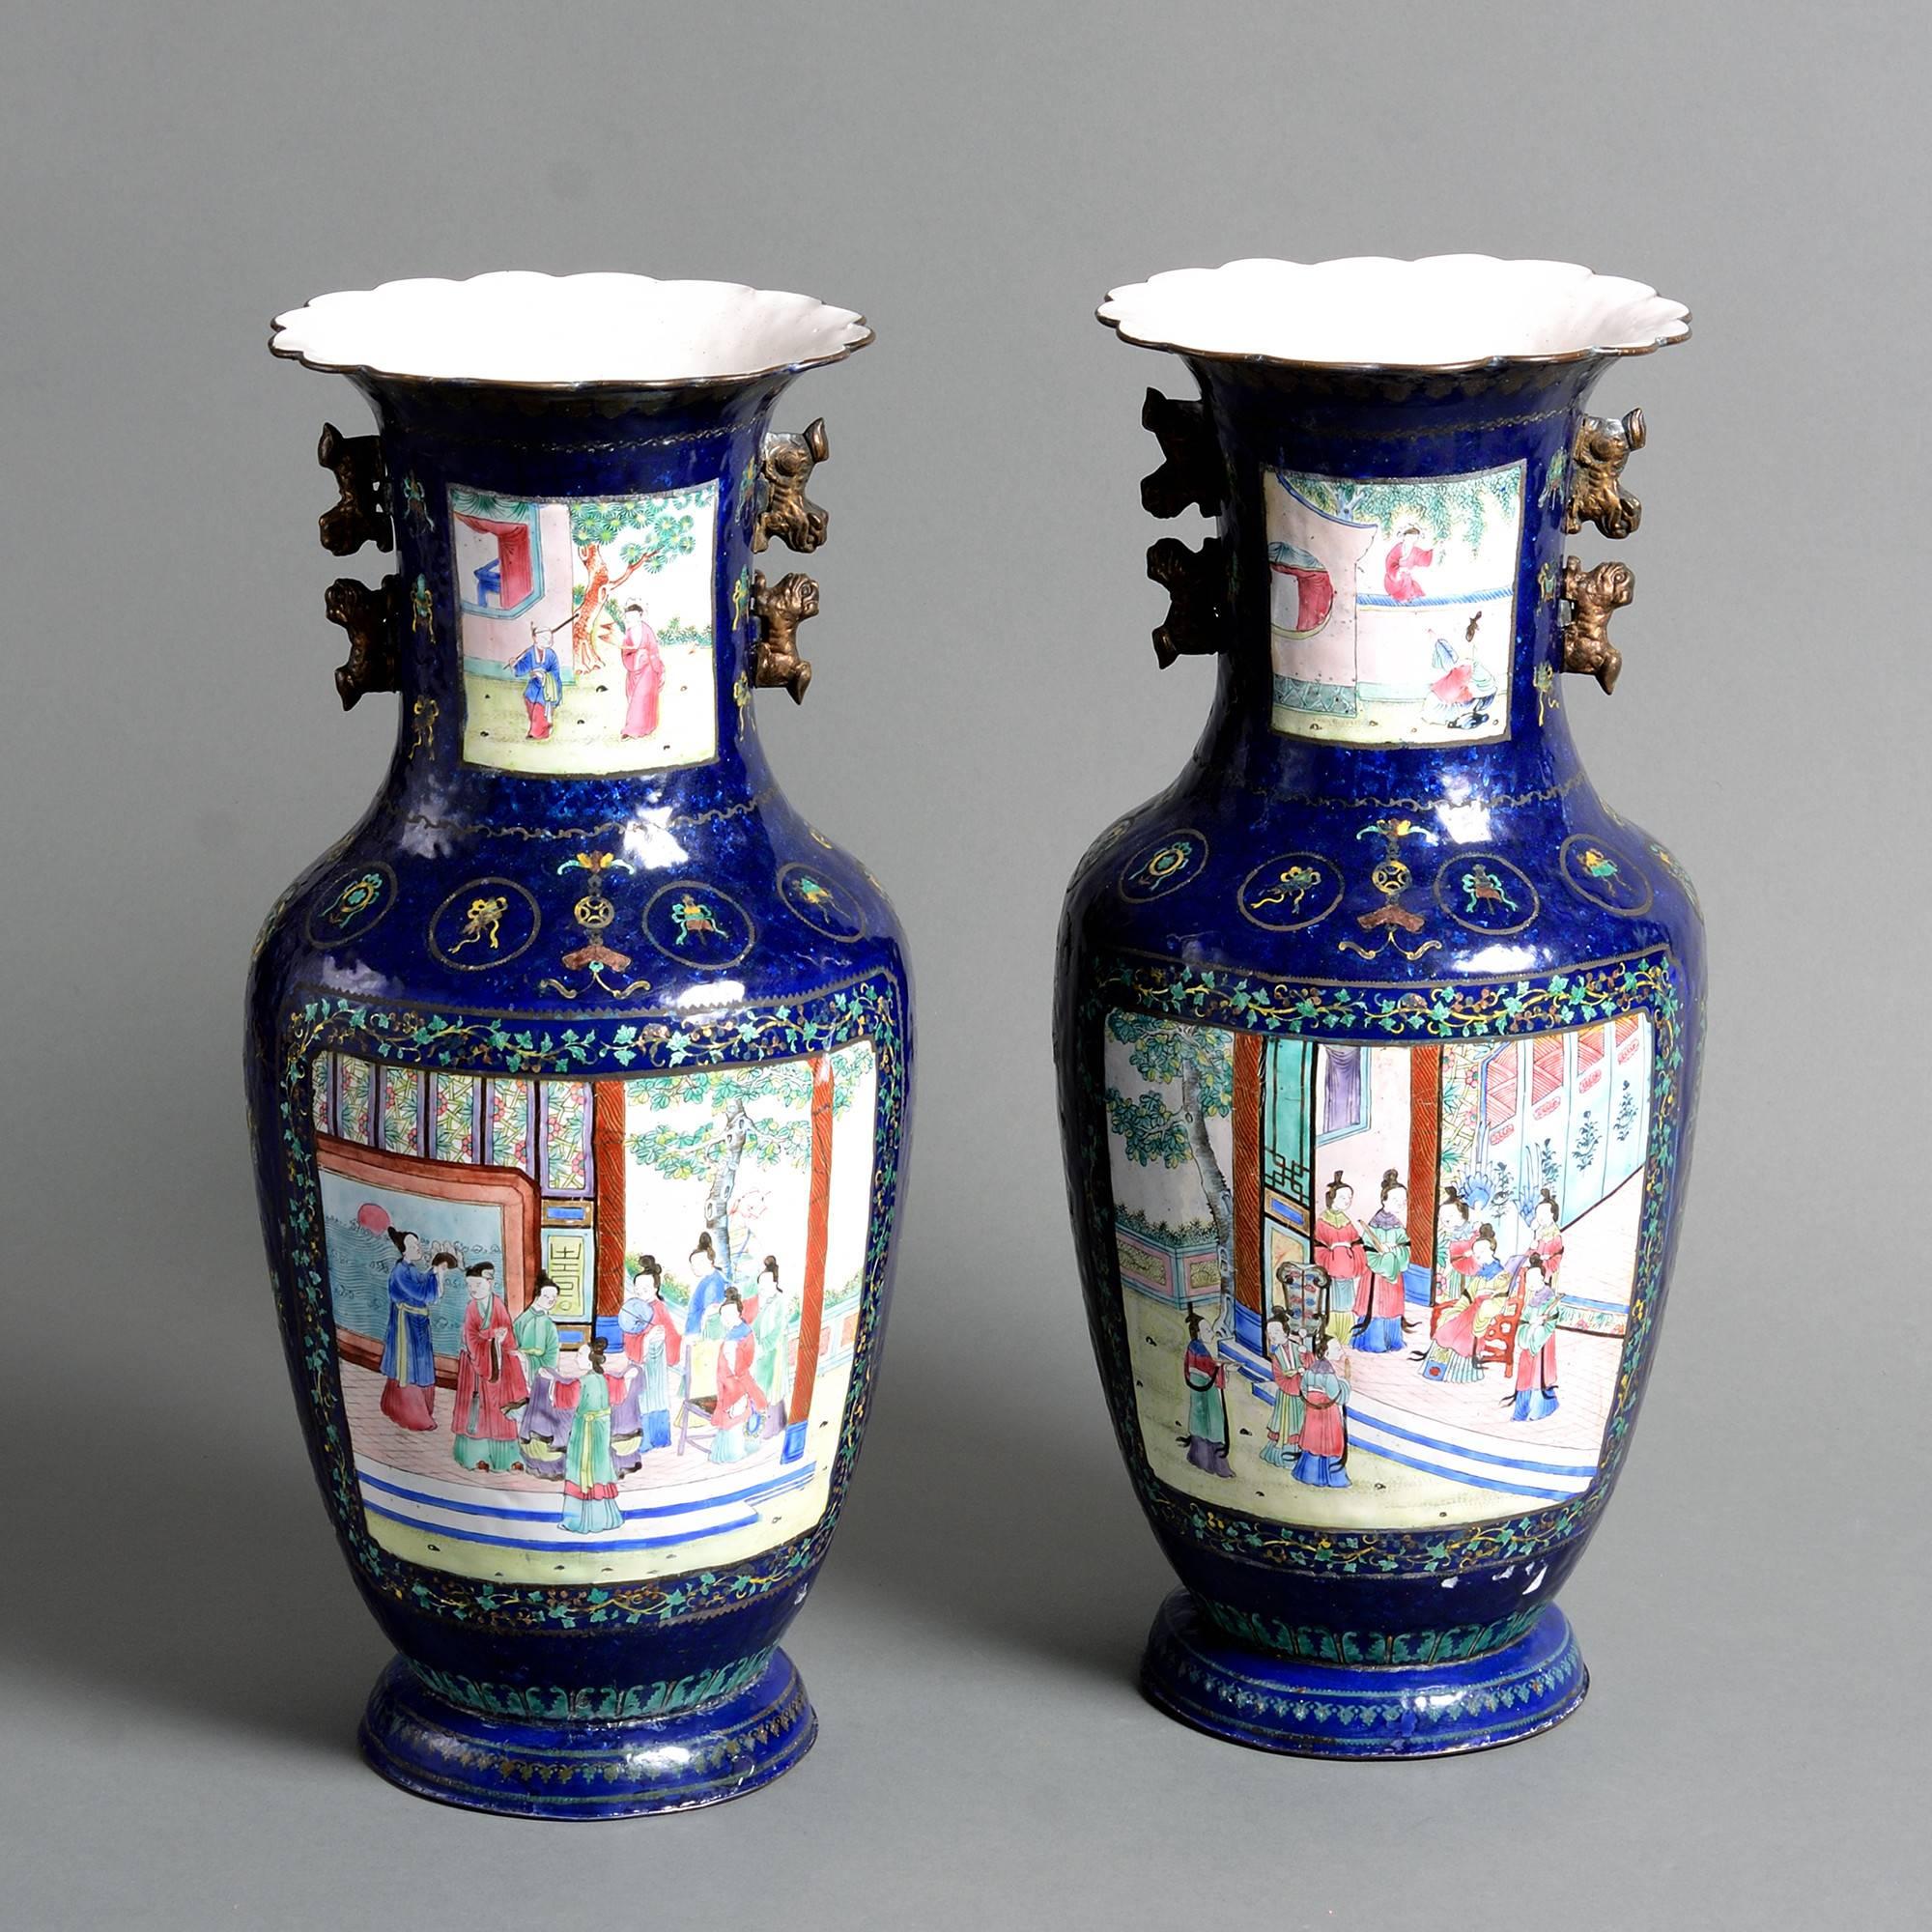 A fine pair of early 19th century Canton Enamel vases, each decorated with figurative polychrome panels upon rich blue ground. 

Qing dynasty.

Daoguang Period (1821-1850)

with restorations.